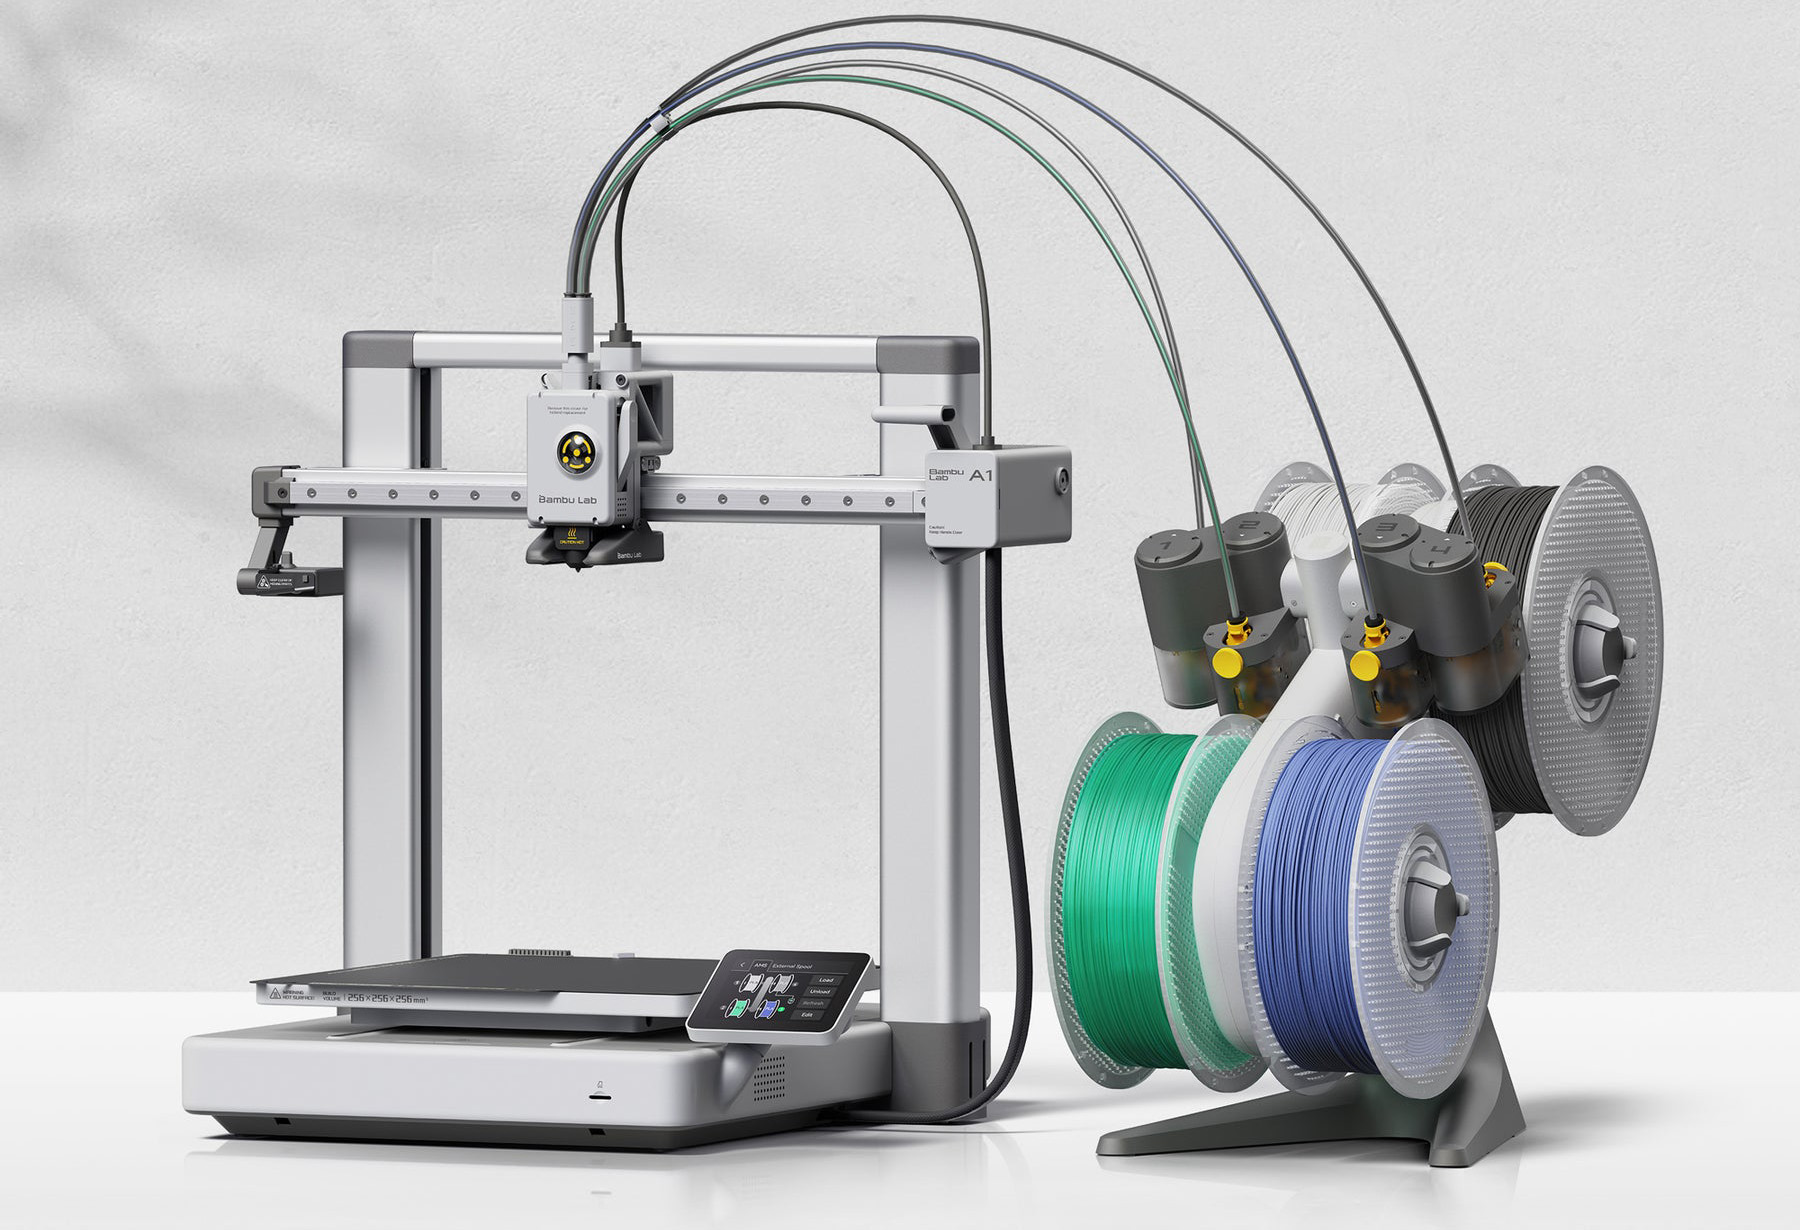 bambu-labs-new-a1-3d-printer-is-being-released-today Bambu Lab's new A1 3D Printer is being released today